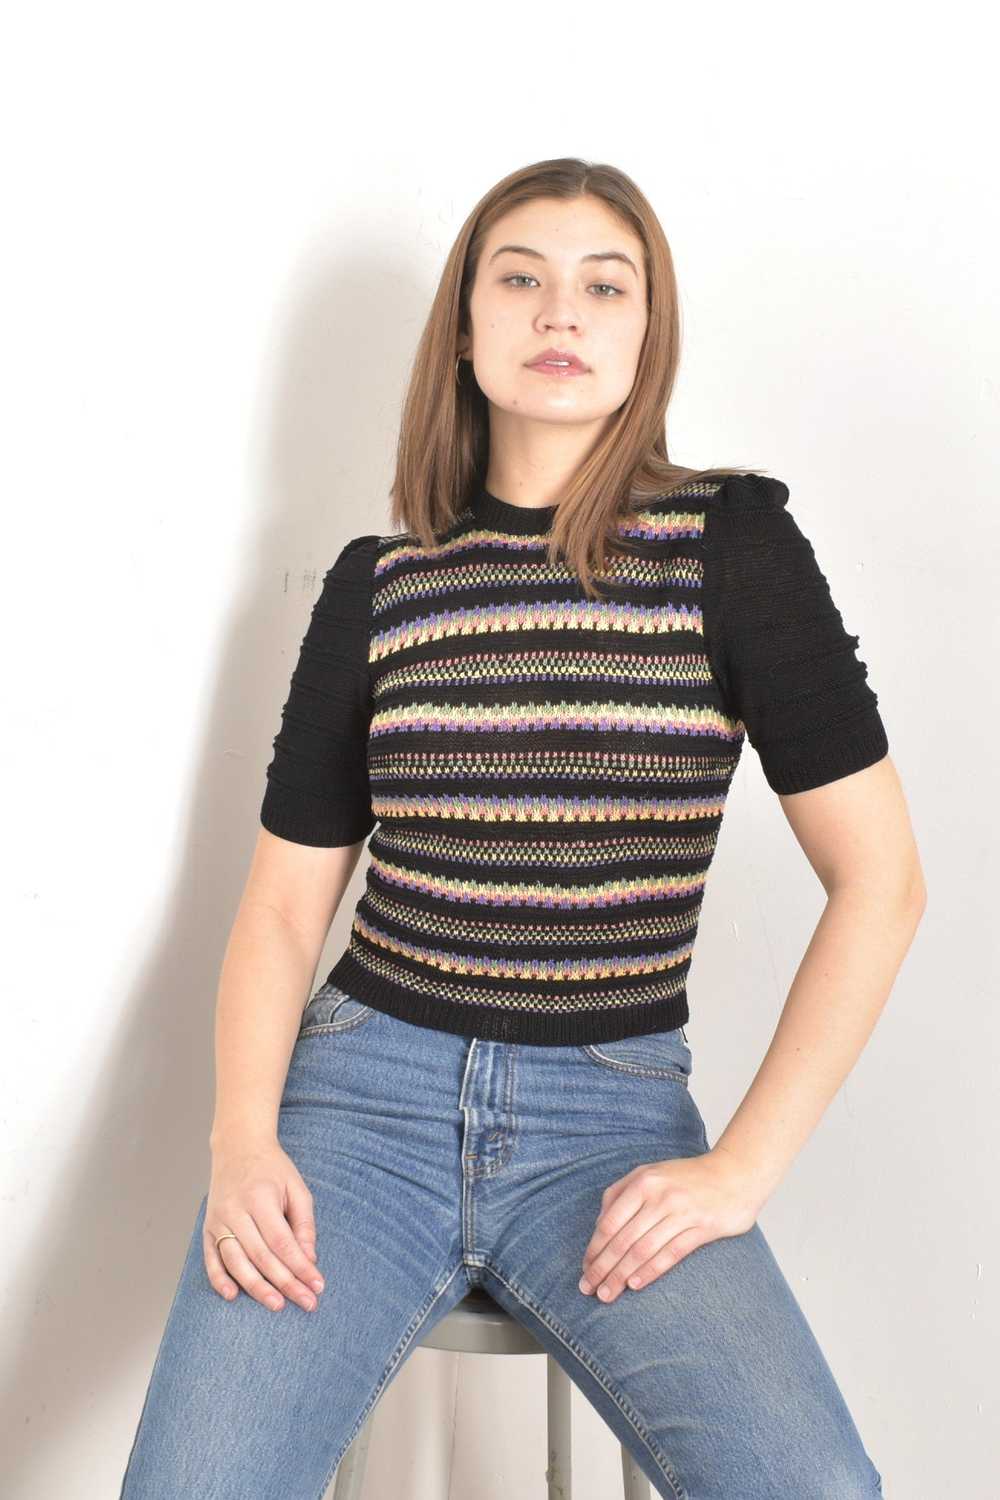 1940s Striped Knit Sweater-small - image 3